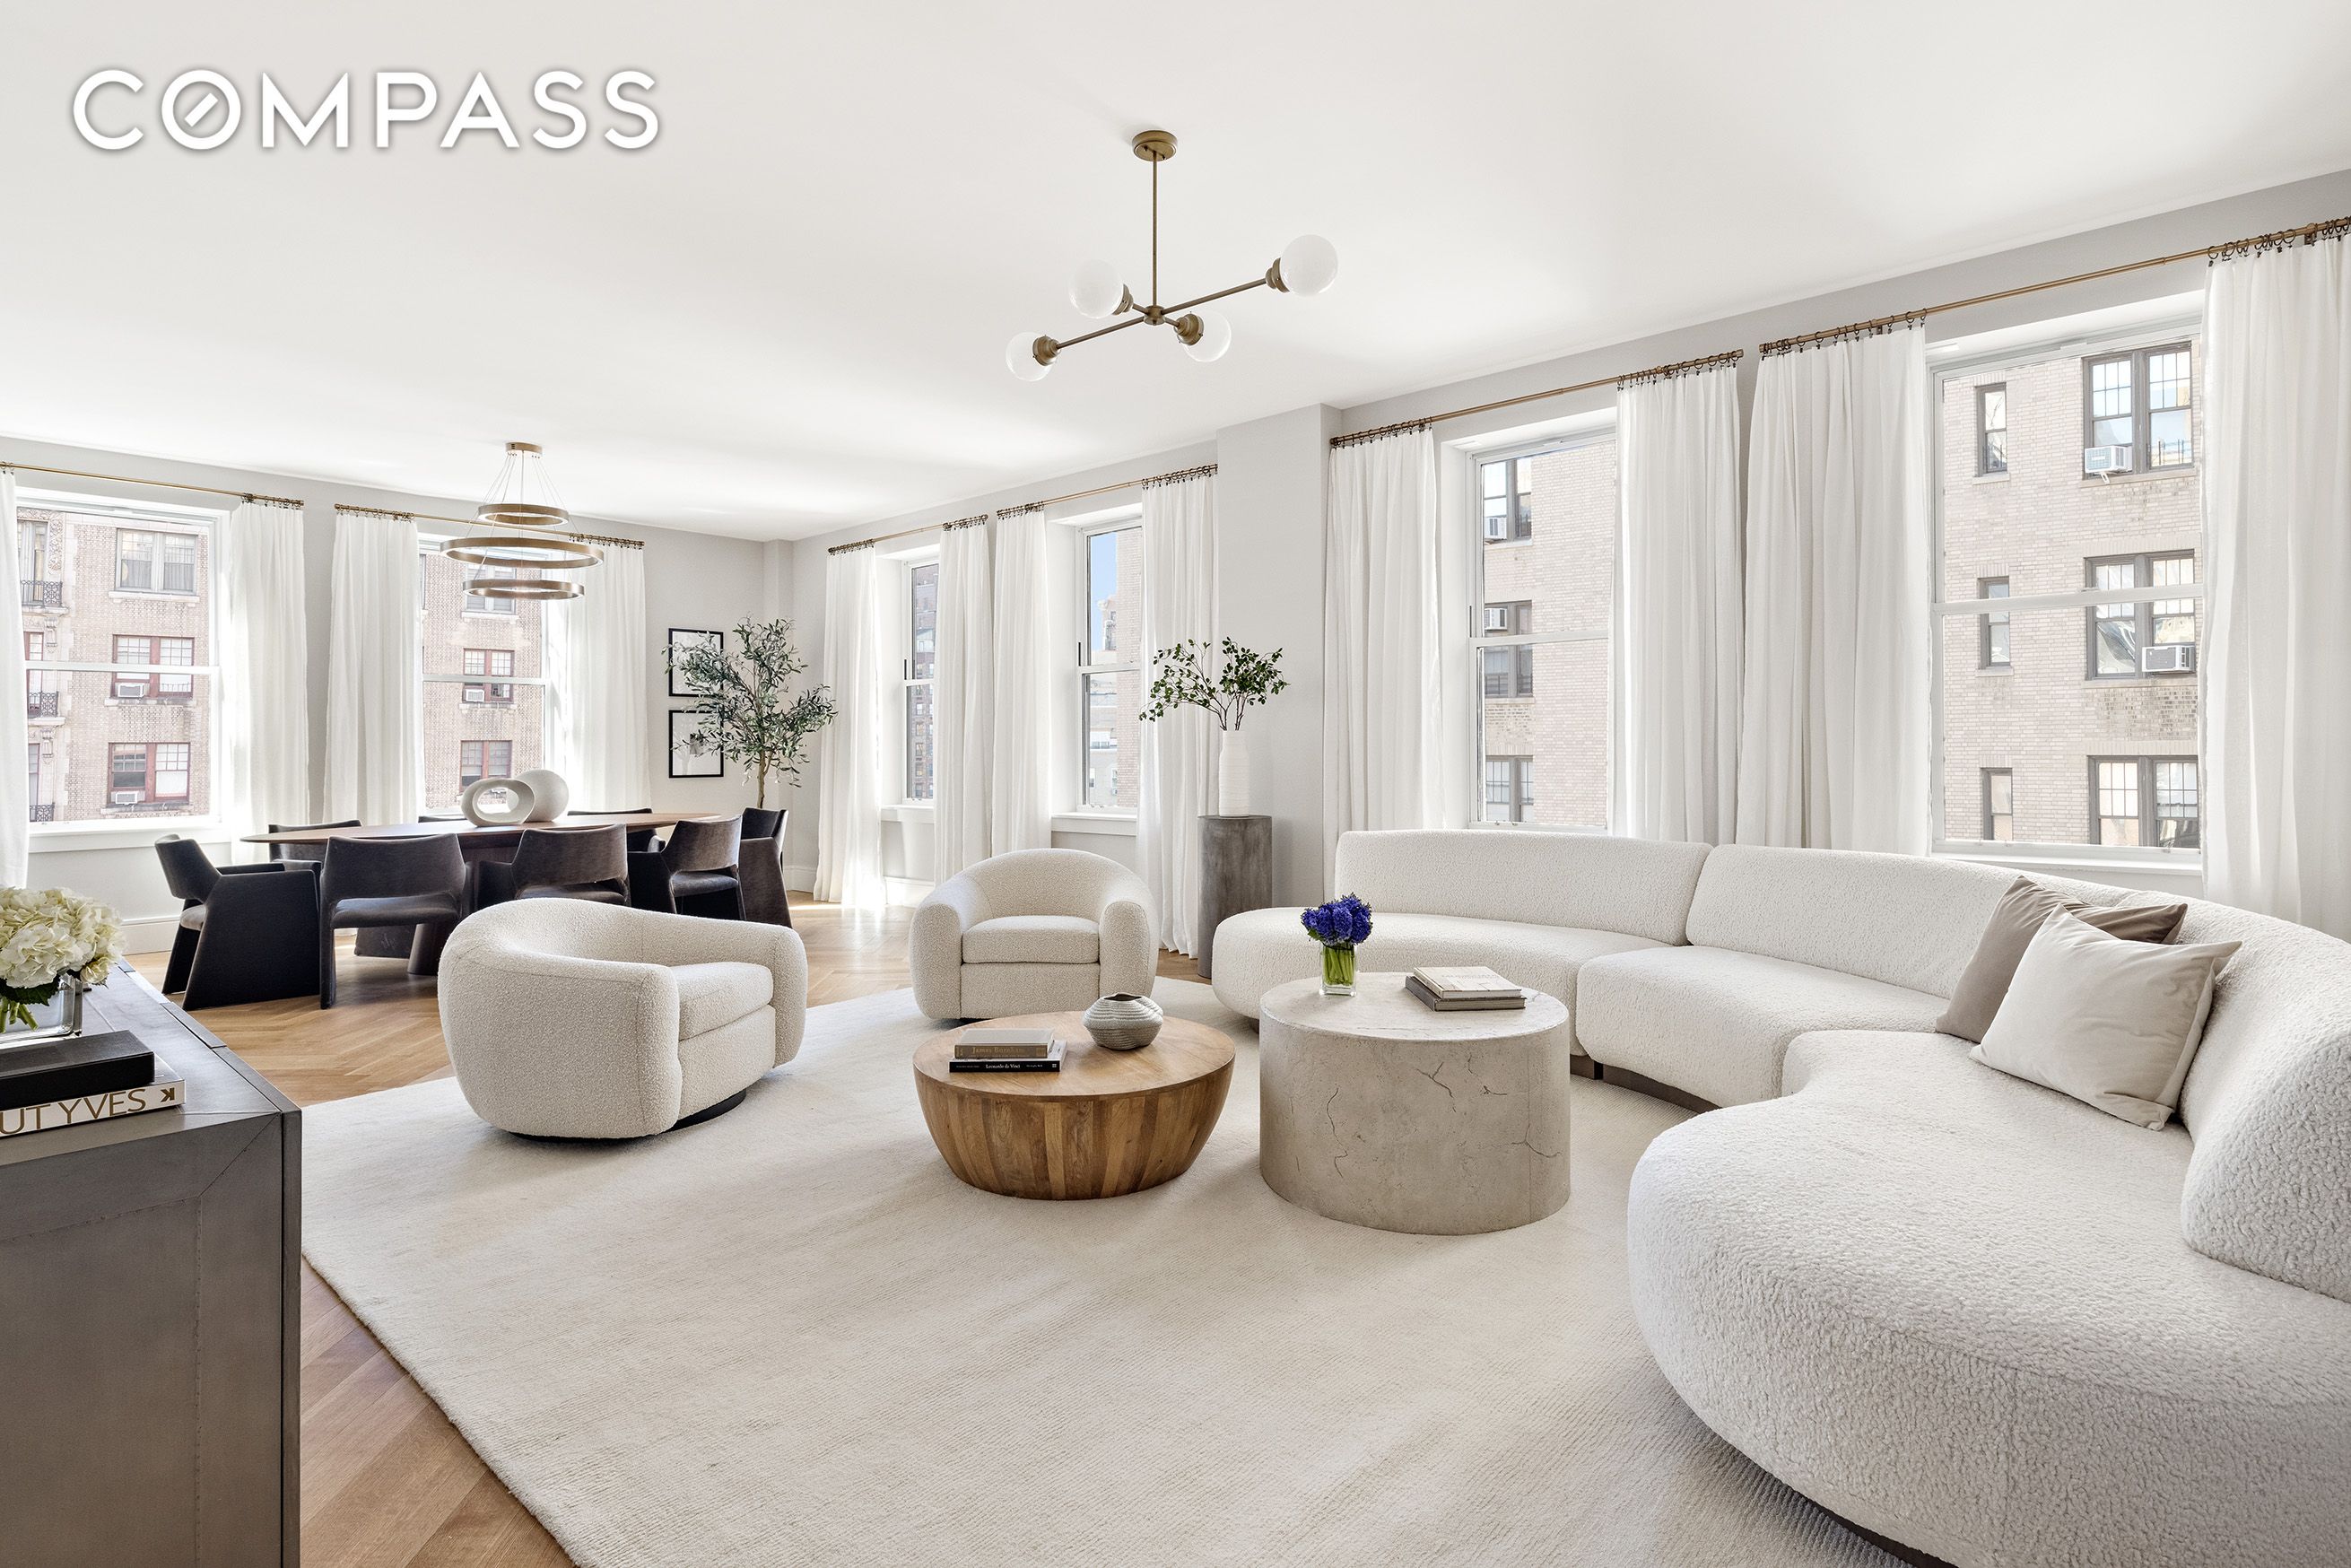 378 West End Avenue 7A, Upper West Side, Upper West Side, NYC - 4 Bedrooms  
4.5 Bathrooms  
6 Rooms - 